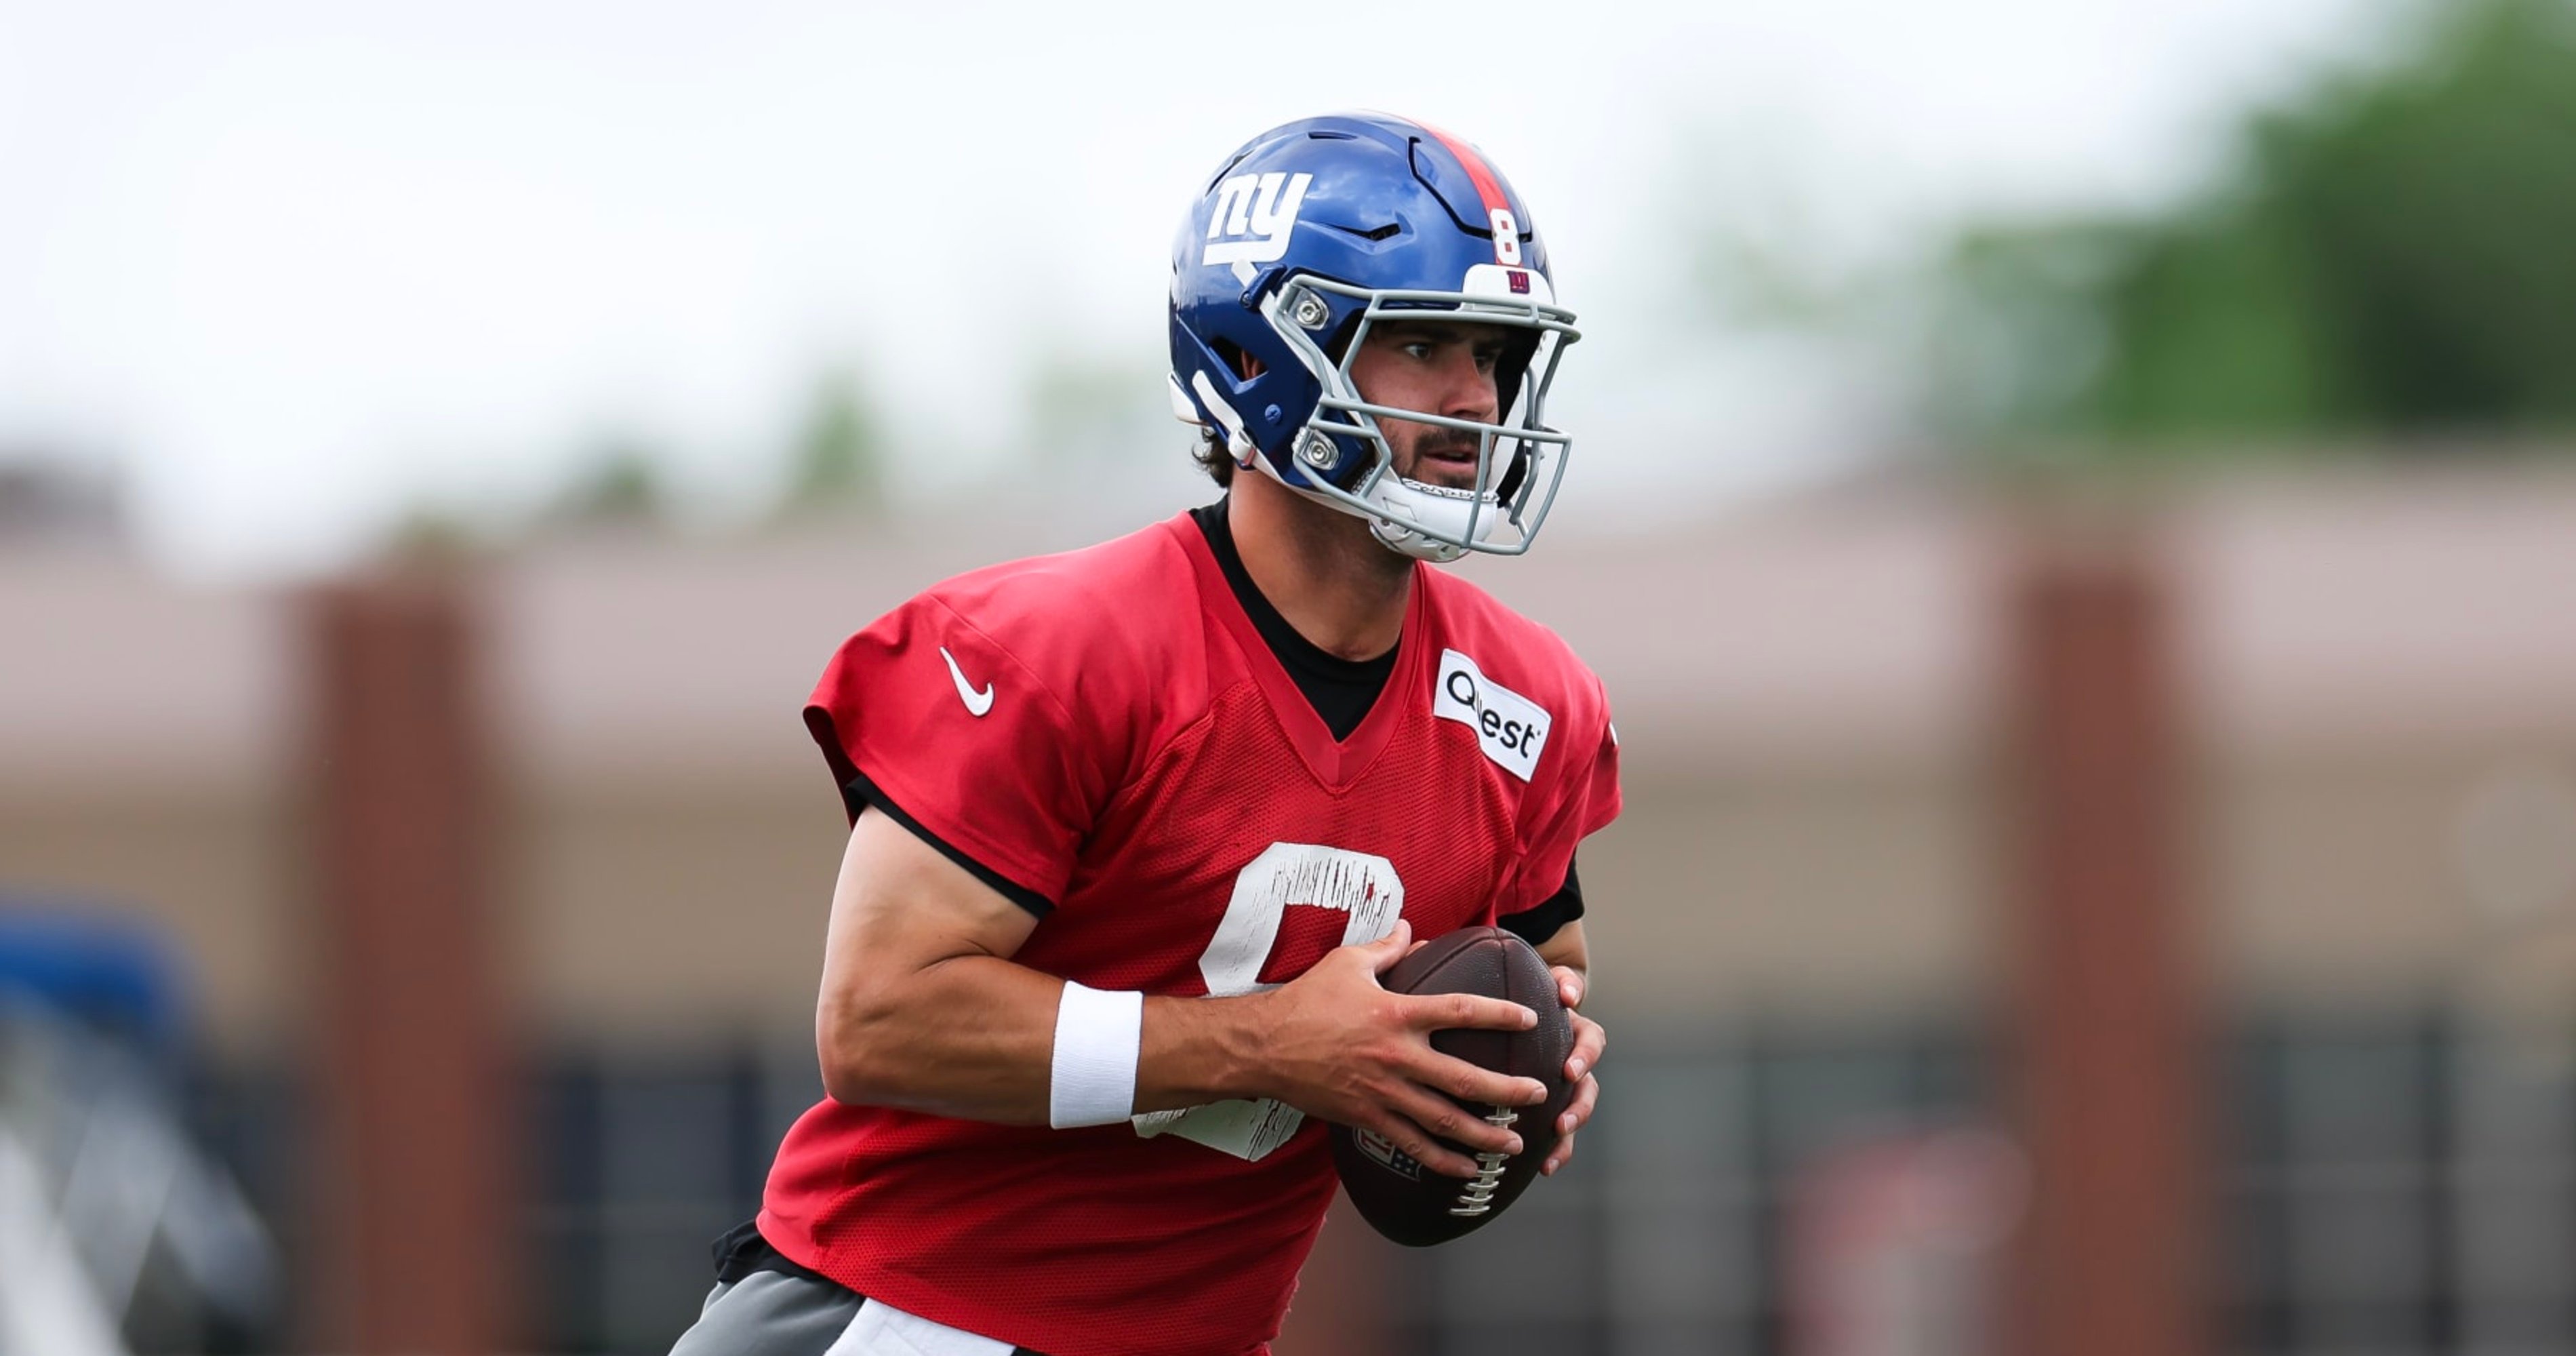 NFL Rumors: Giants Want Daniel Jones as QB1 to See If 'They Need to Move on in 2025'